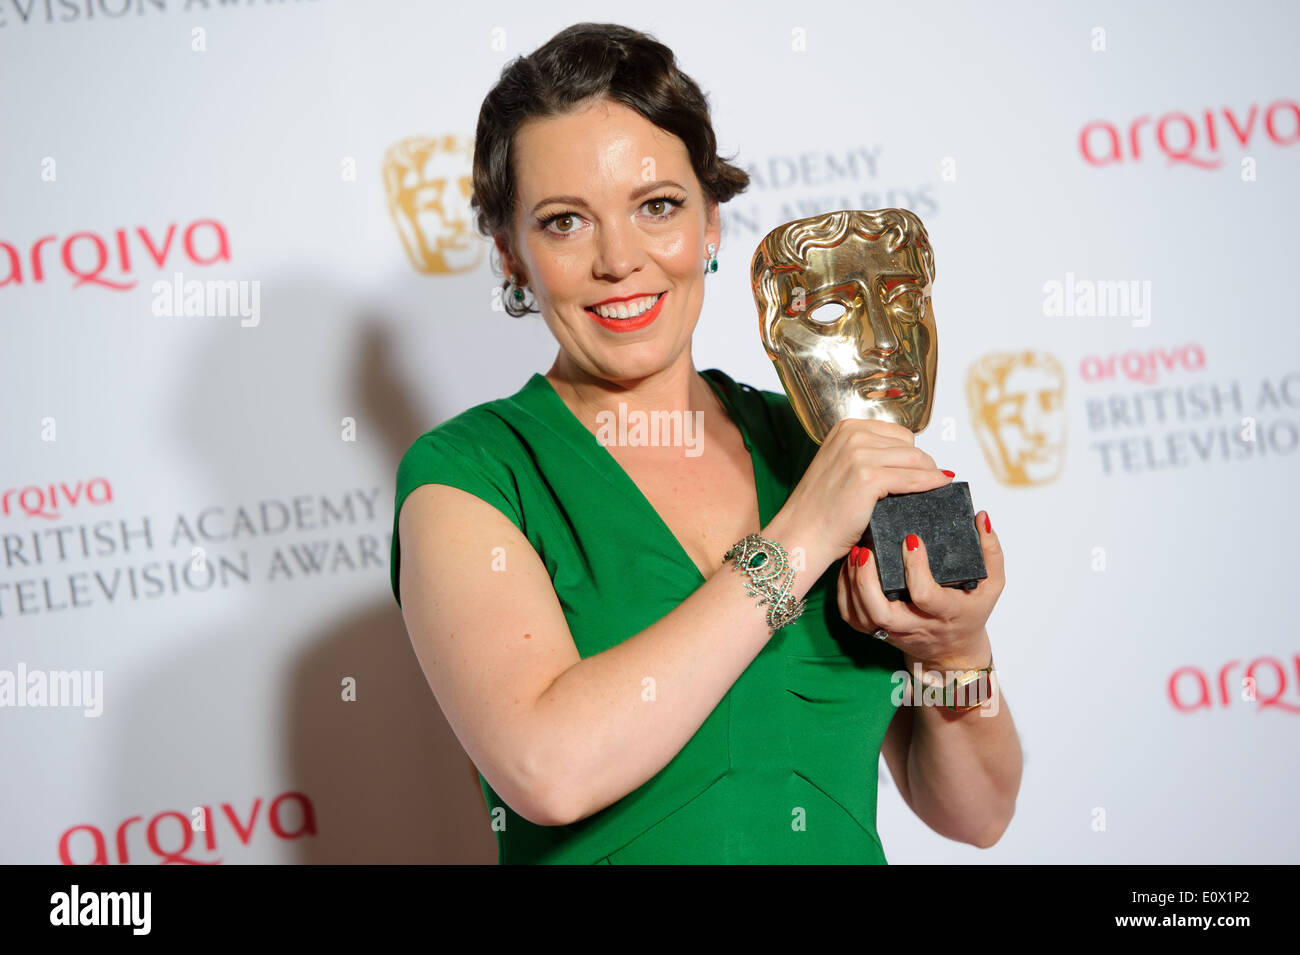 Olivia Colman poses for photographers in the winners room at the British Academy Television Awards. Stock Photo